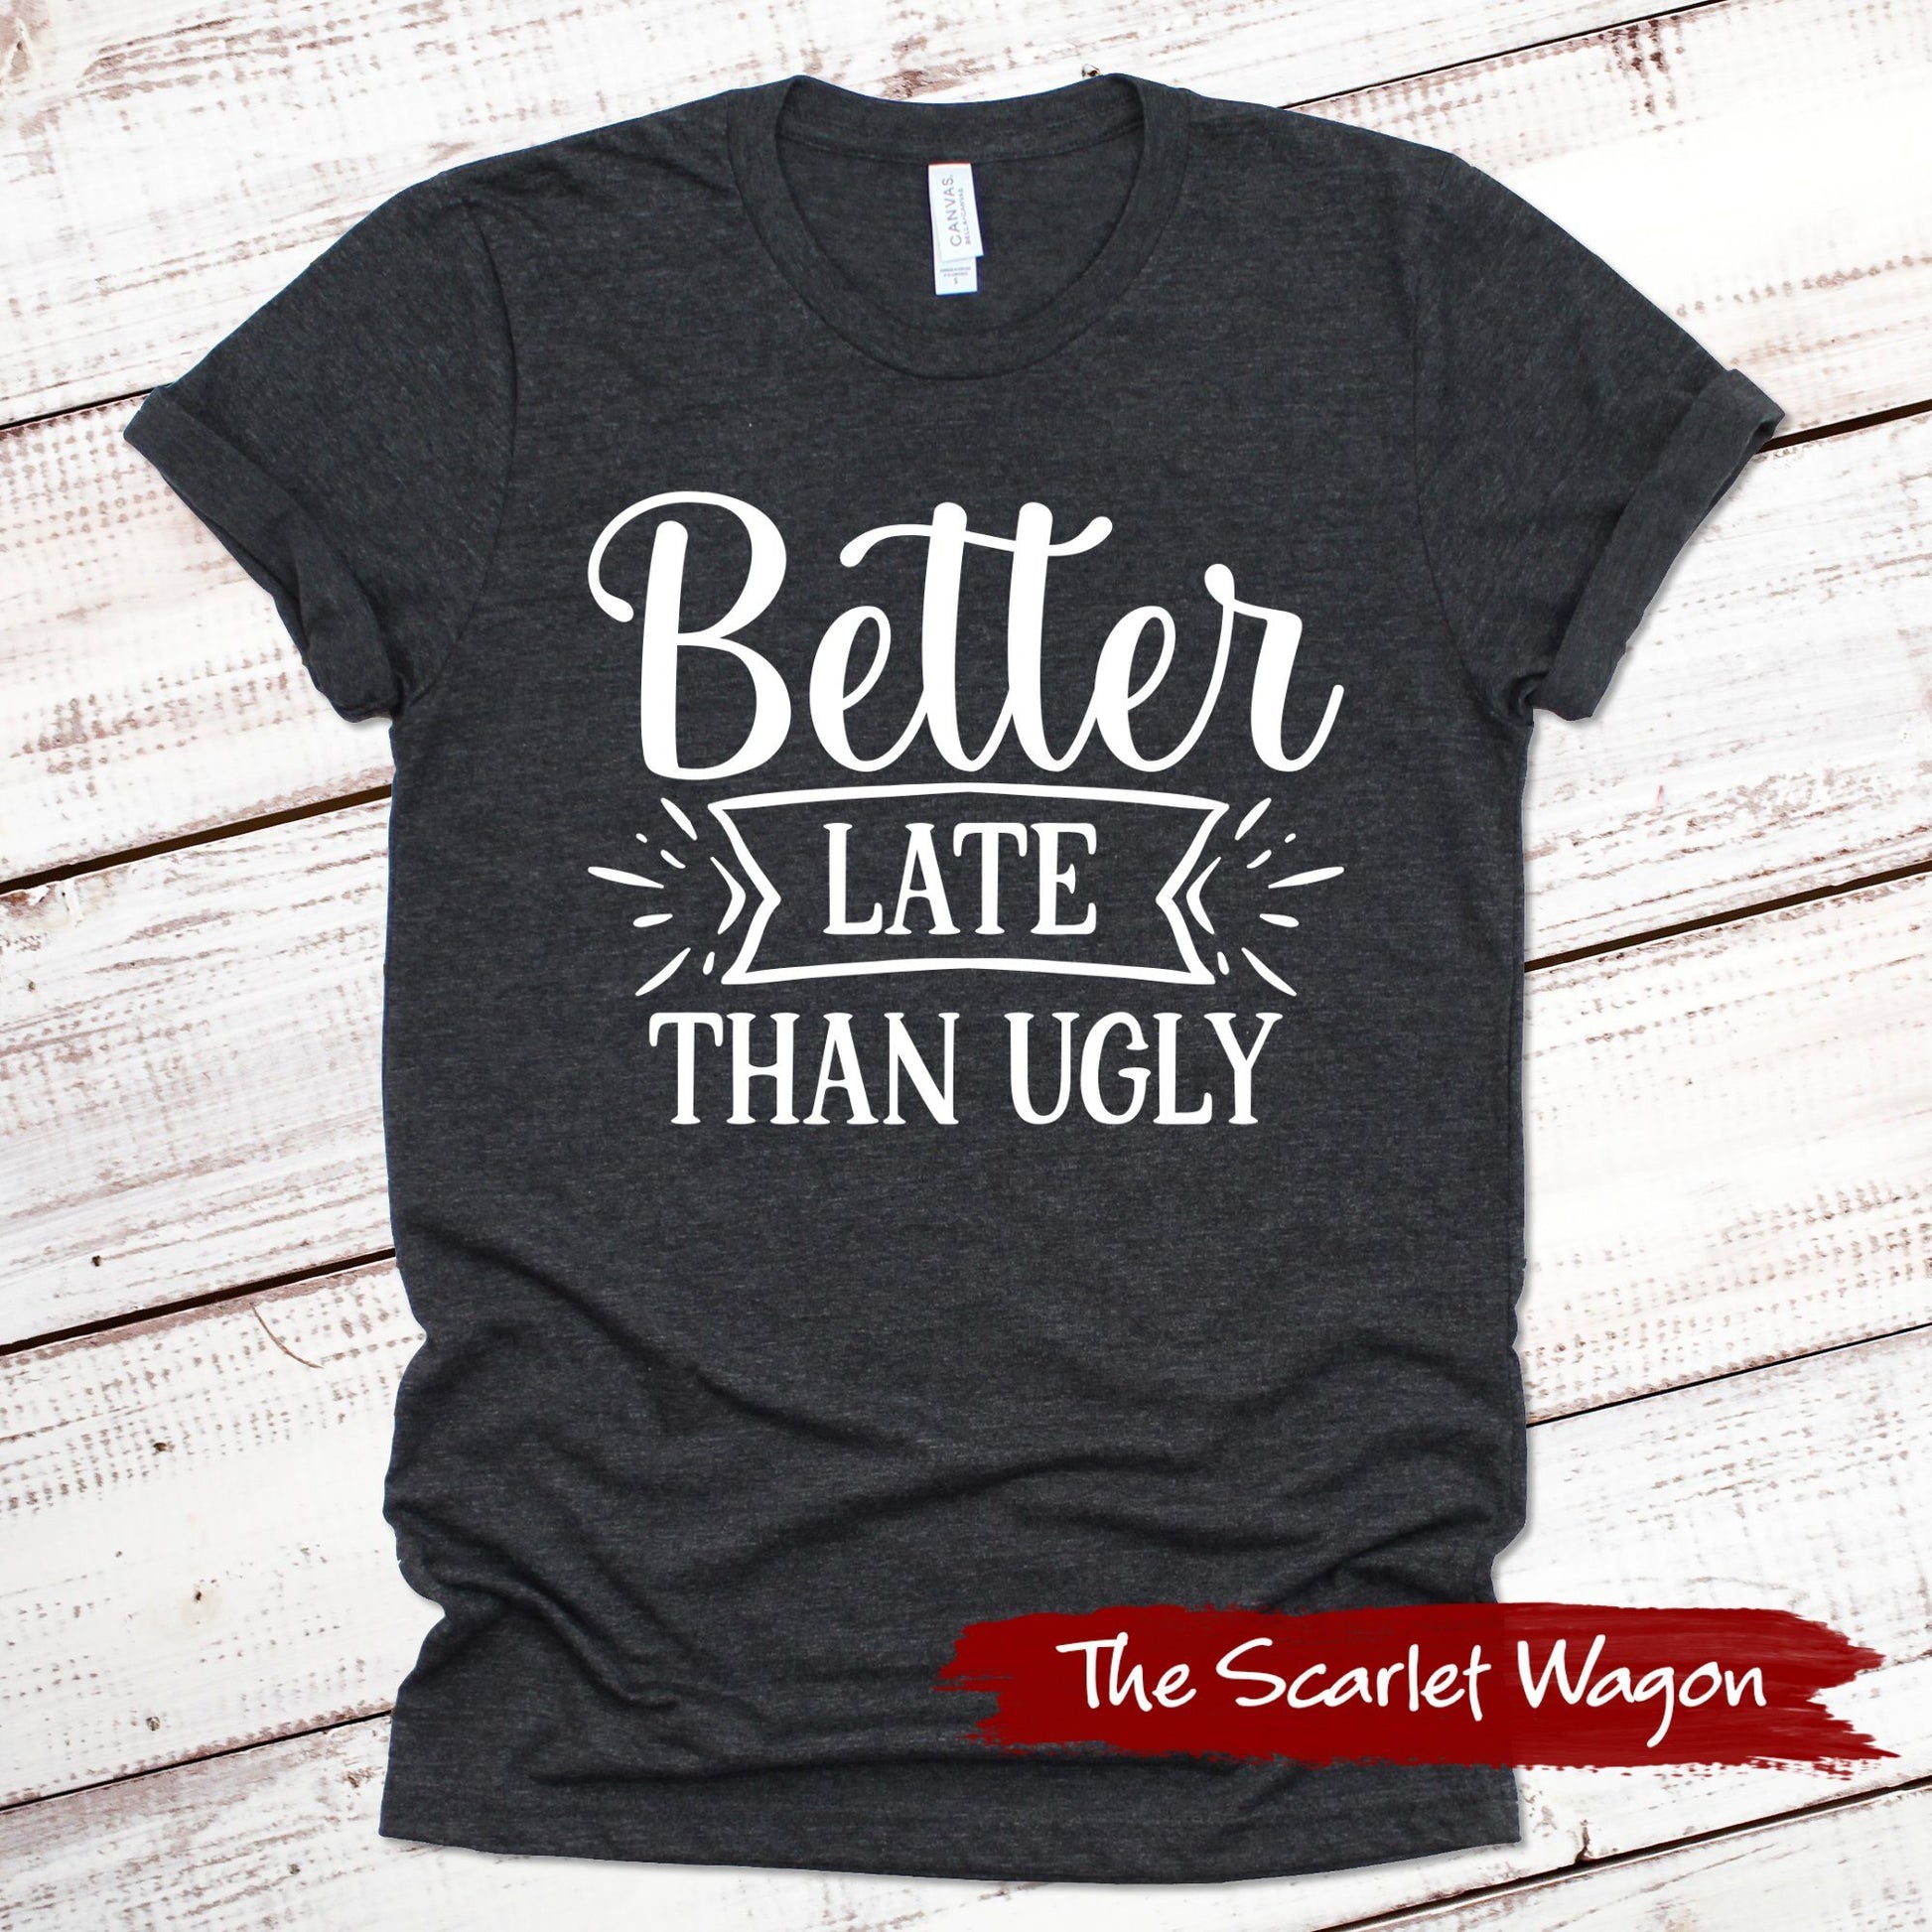 Better Late Than Ugly Funny Shirt Scarlet Wagon Dark Gray Heather XS 